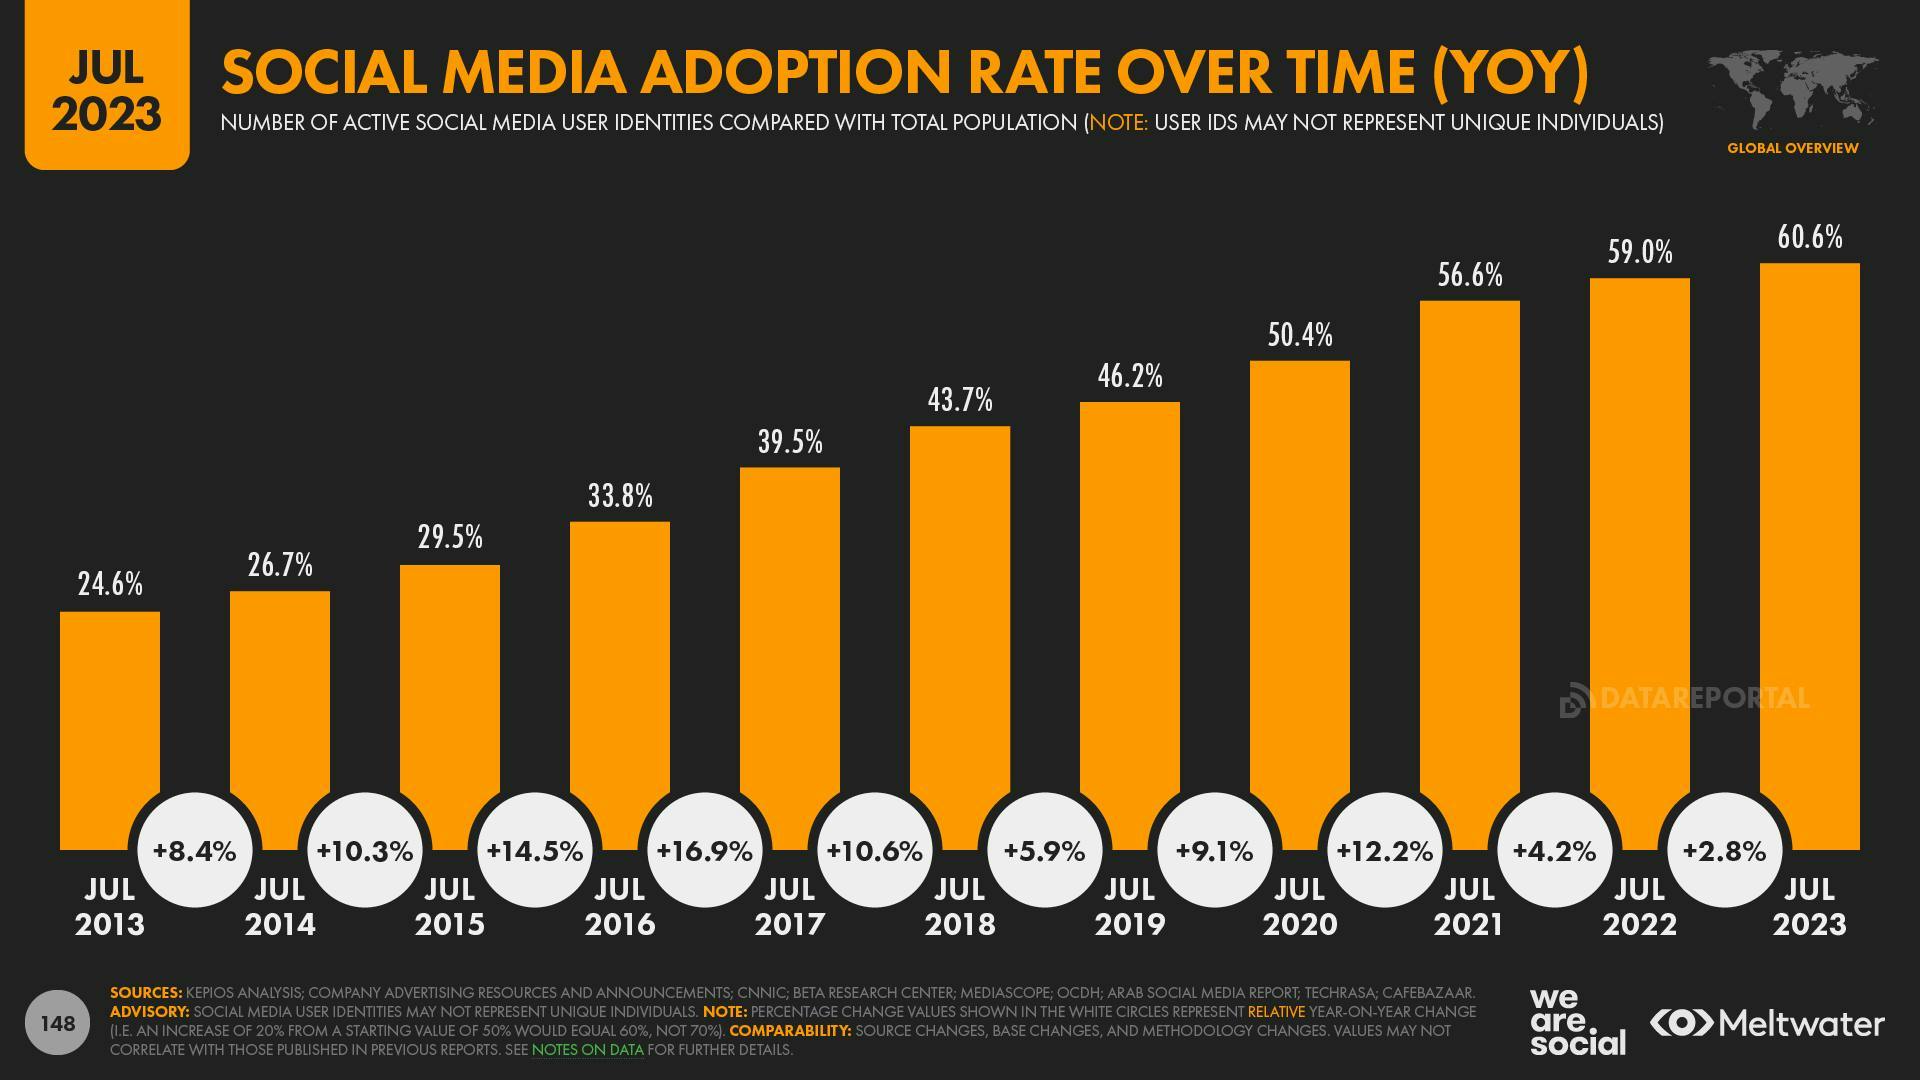 A bar chart showing the social media adoption rate over time (YoY) with the highest bar belonging to July 2023, which saw a 2.8% increase of adoption up to 60.6%.